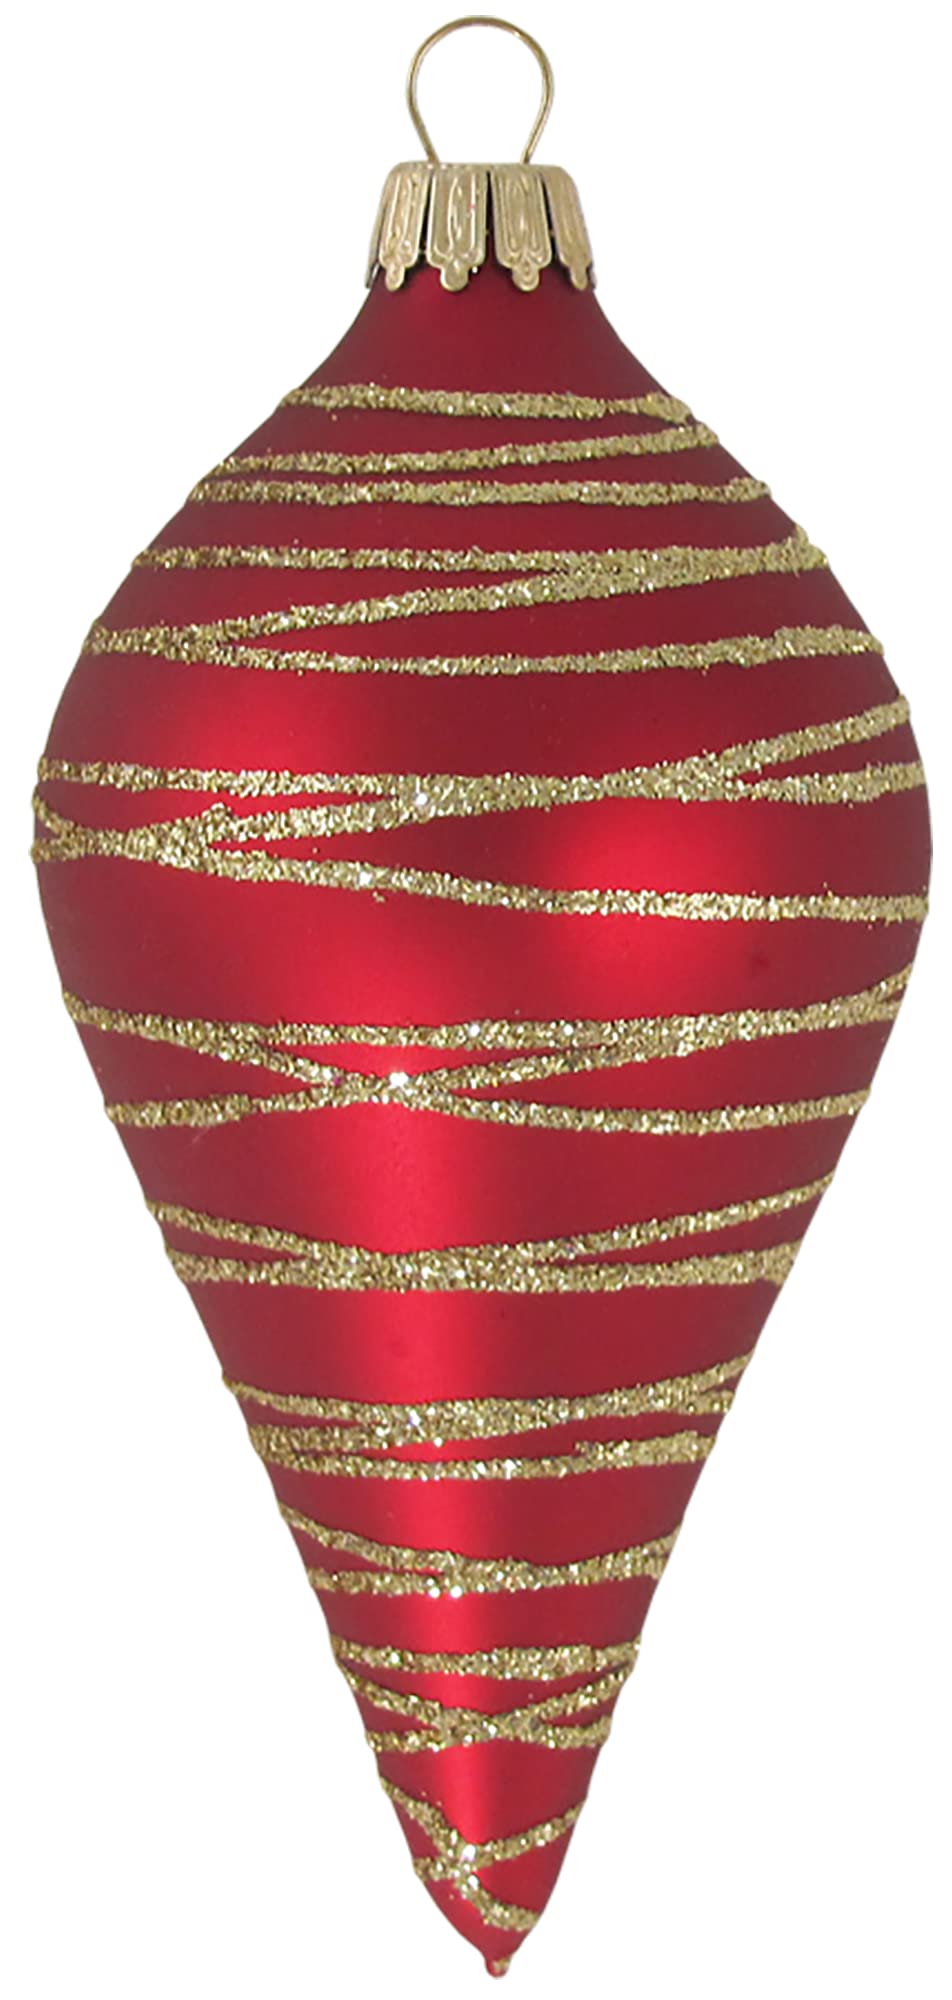 Glass Christmas Tree Ornaments - 67mm/2.63" [4 Pieces] Decorated Balls from Christmas by Krebs Seamless Hanging Holiday Decor (Red and Green Velvet 4" Drops with Tangles)